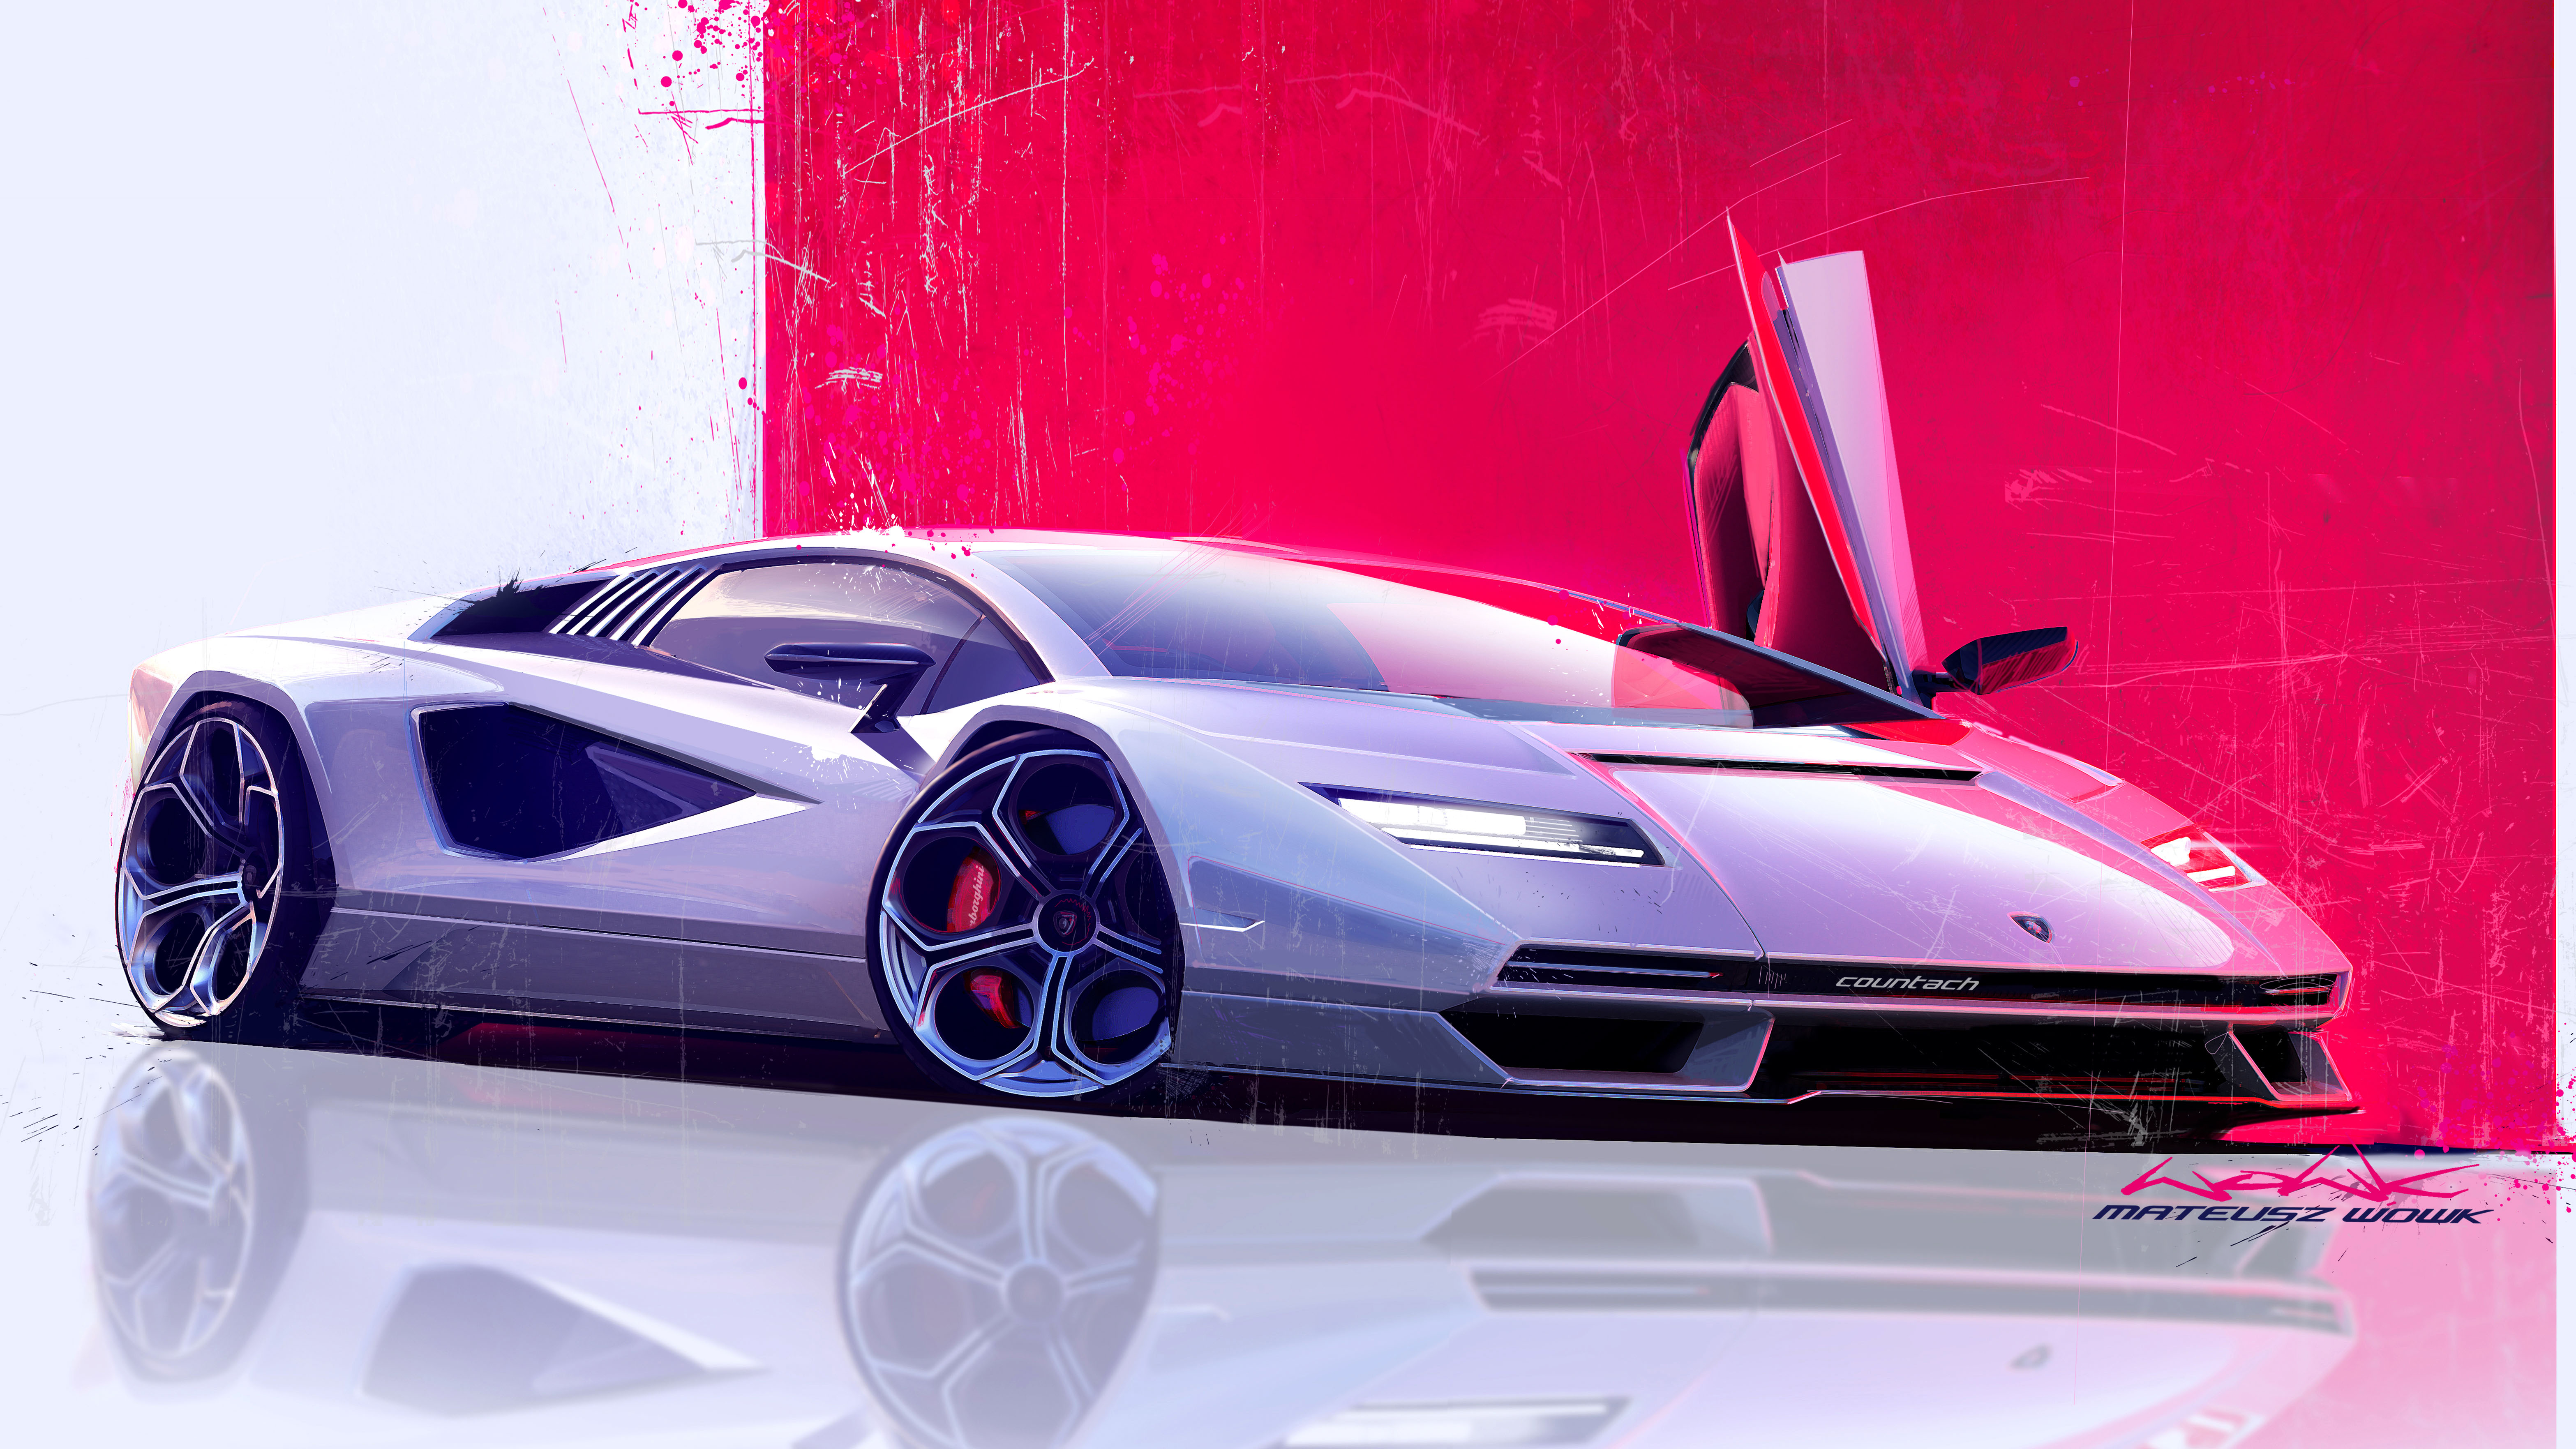 Check out these sketches of the new Lamborghini Countach